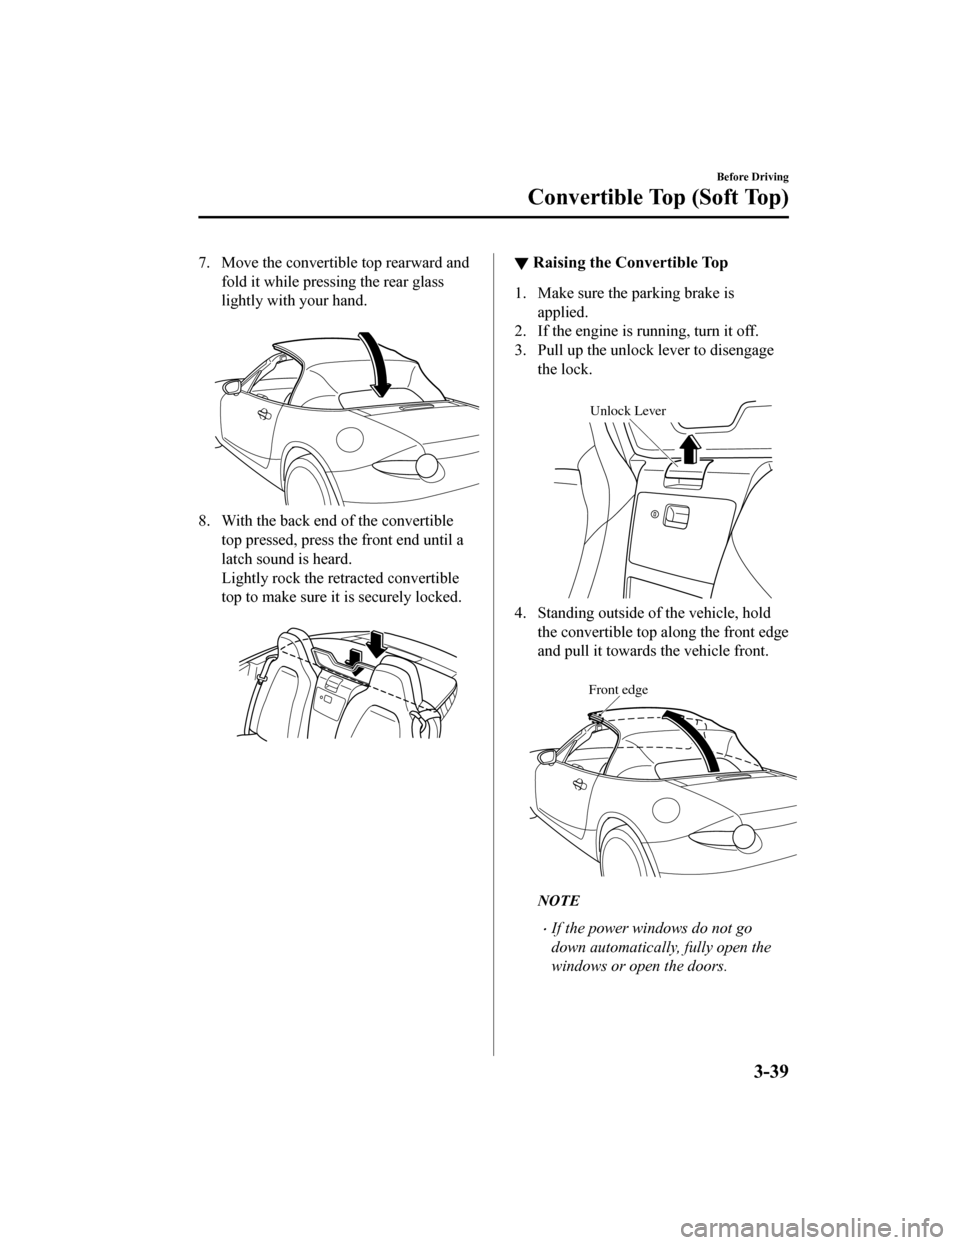 MAZDA MODEL MX-5 2020  Owners Manual (in English) 7. Move the convertible top rearward andfold it while pressing the rear glass
lightly with your hand.
 
8. With the back end of the convertibletop pressed, press the front end until a
latch sound is h